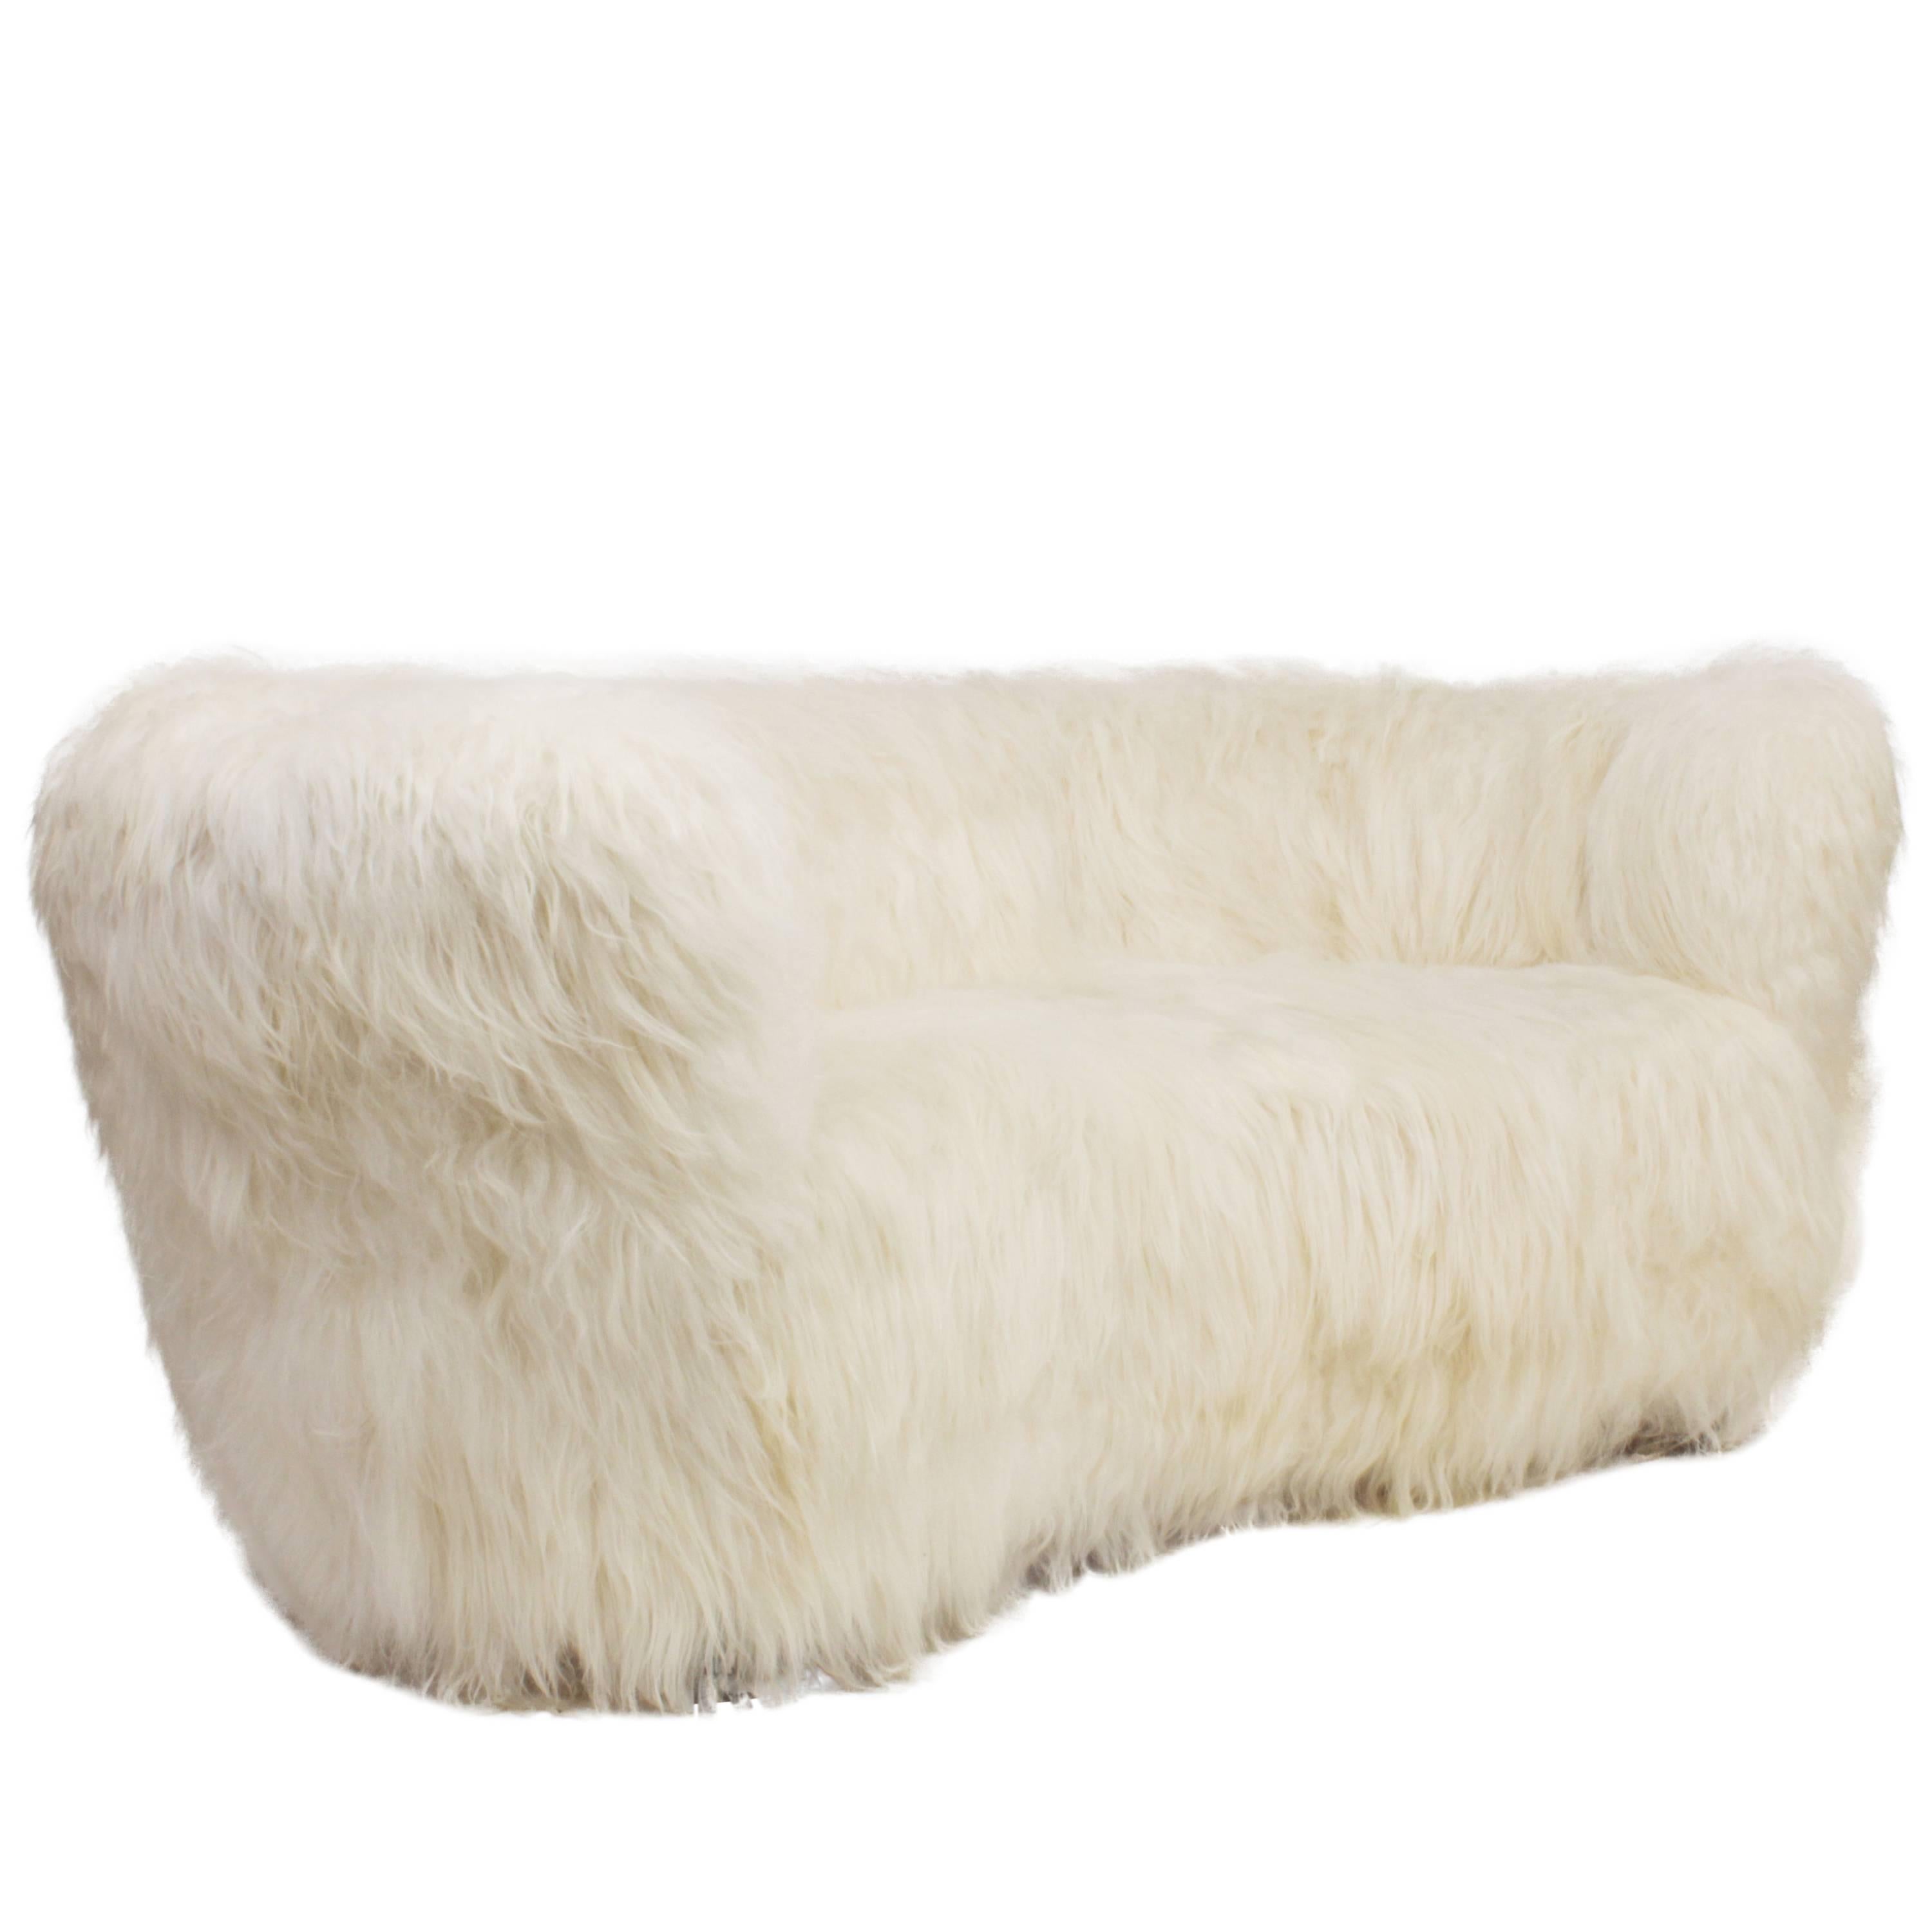 Three-Seat Curved Sofa by Slagelse, in White Sheepskin Denmark, circa 1940 For Sale